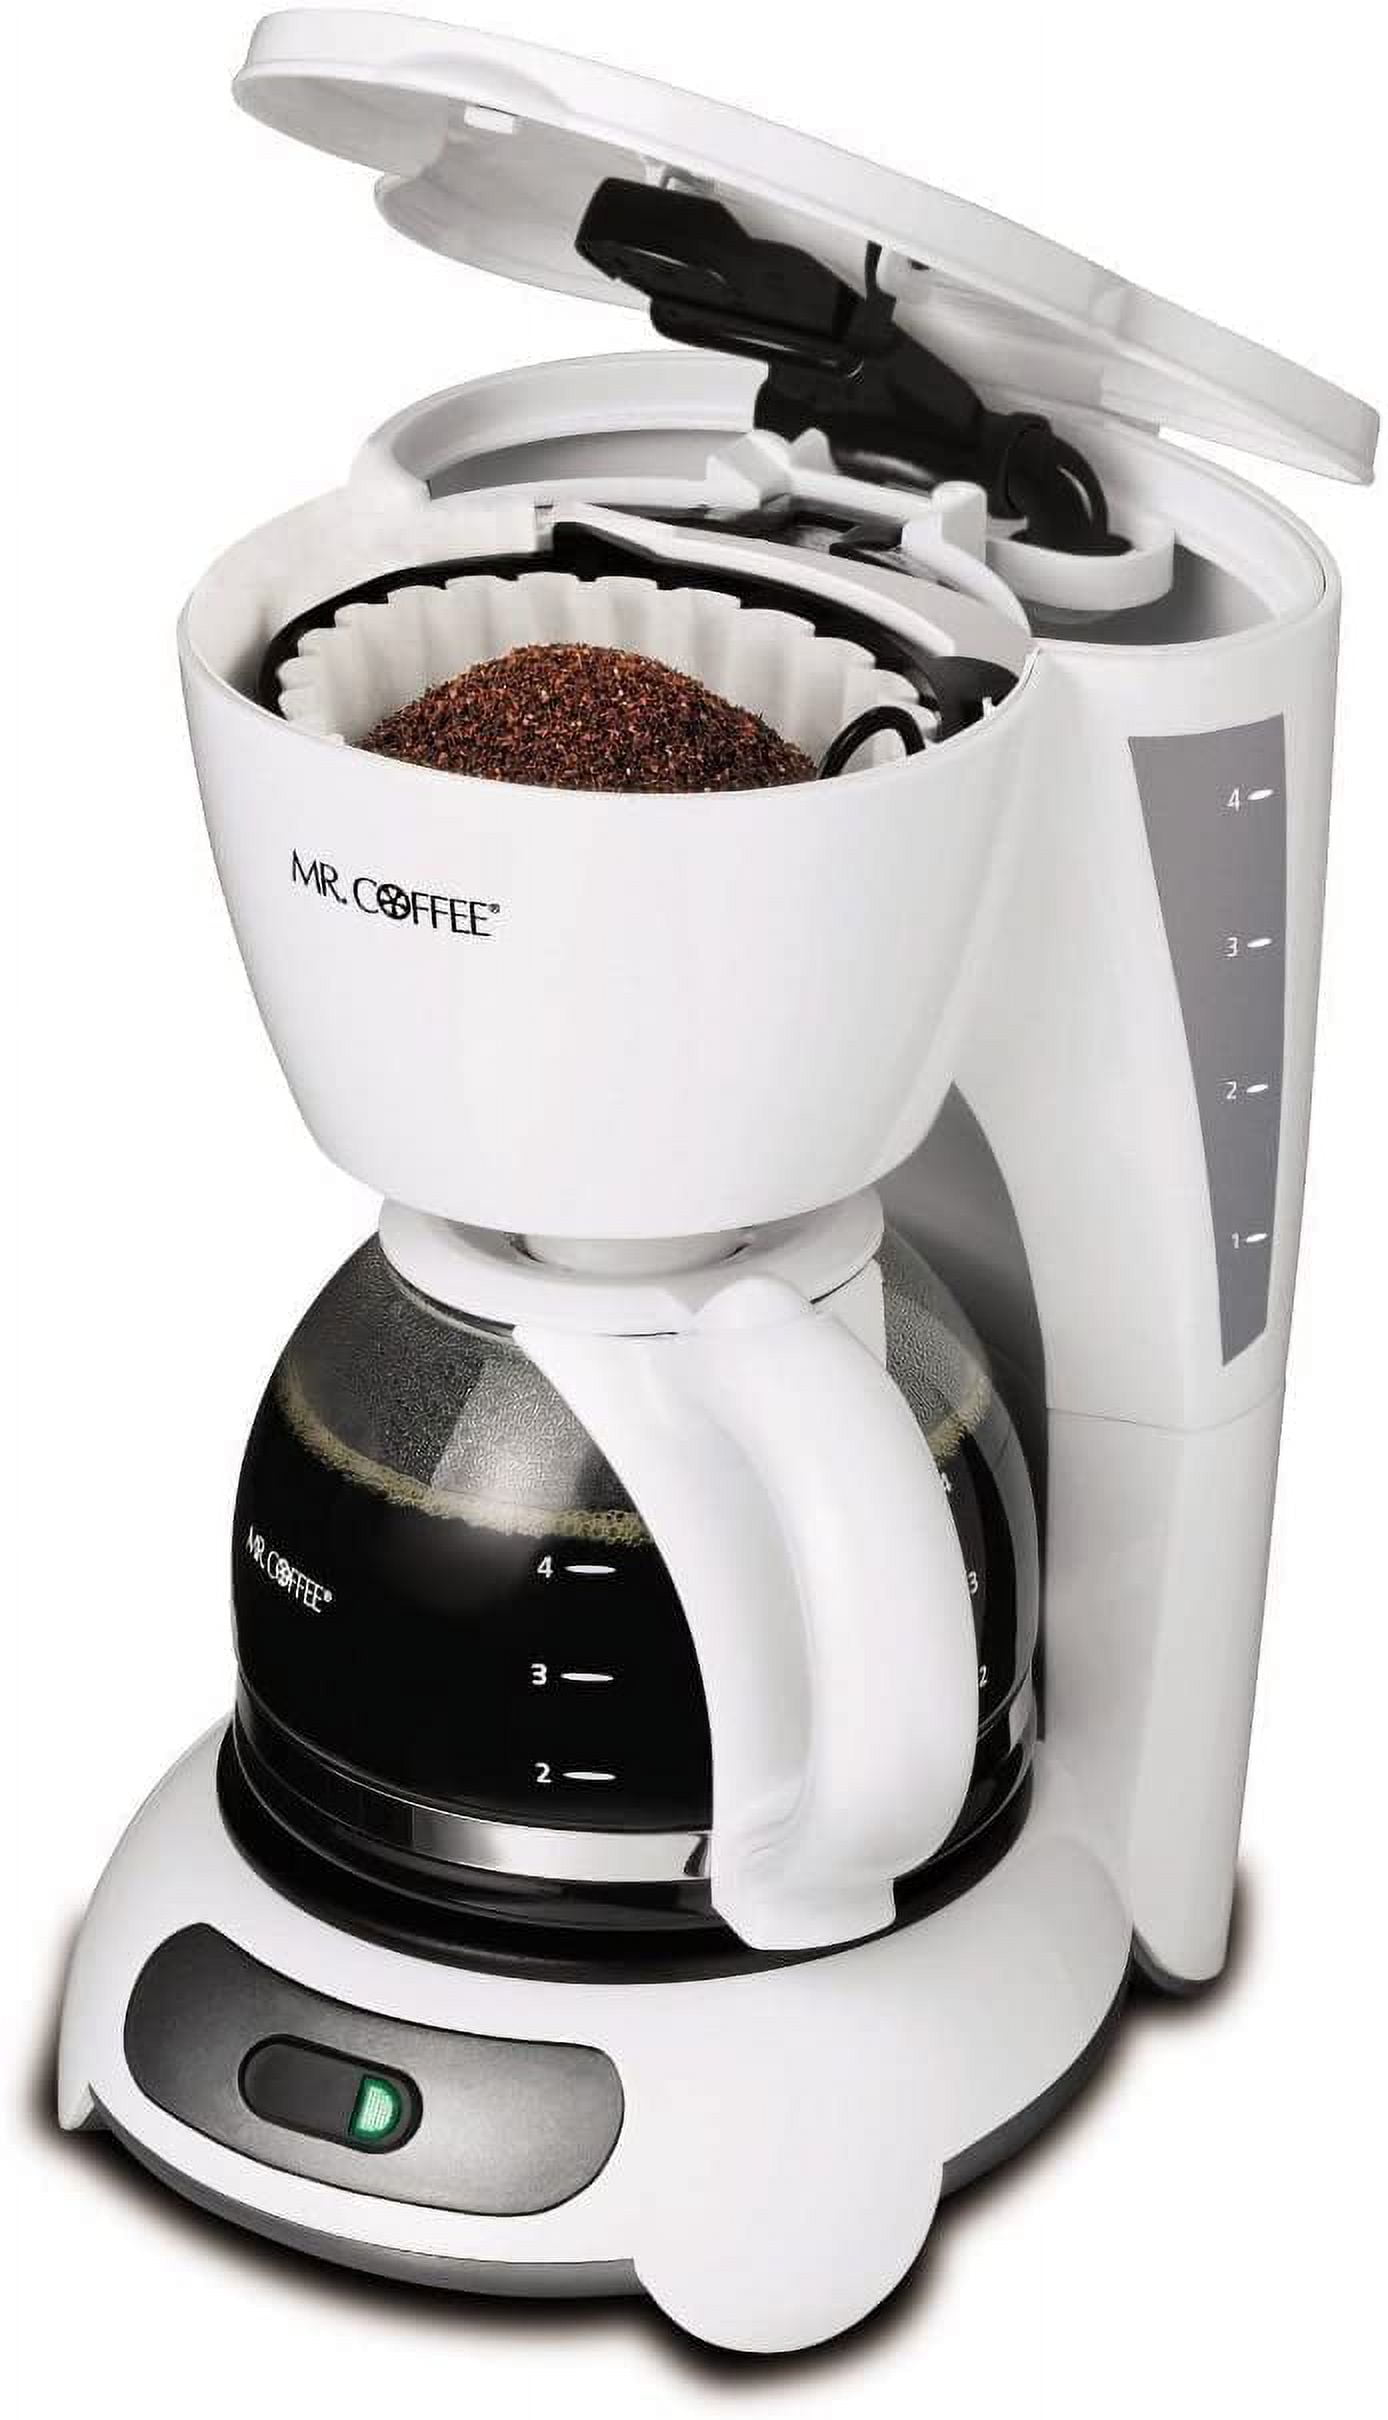 Mr. Coffee JR-4 4 Cup Automatic Drip Coffee Machine - White for